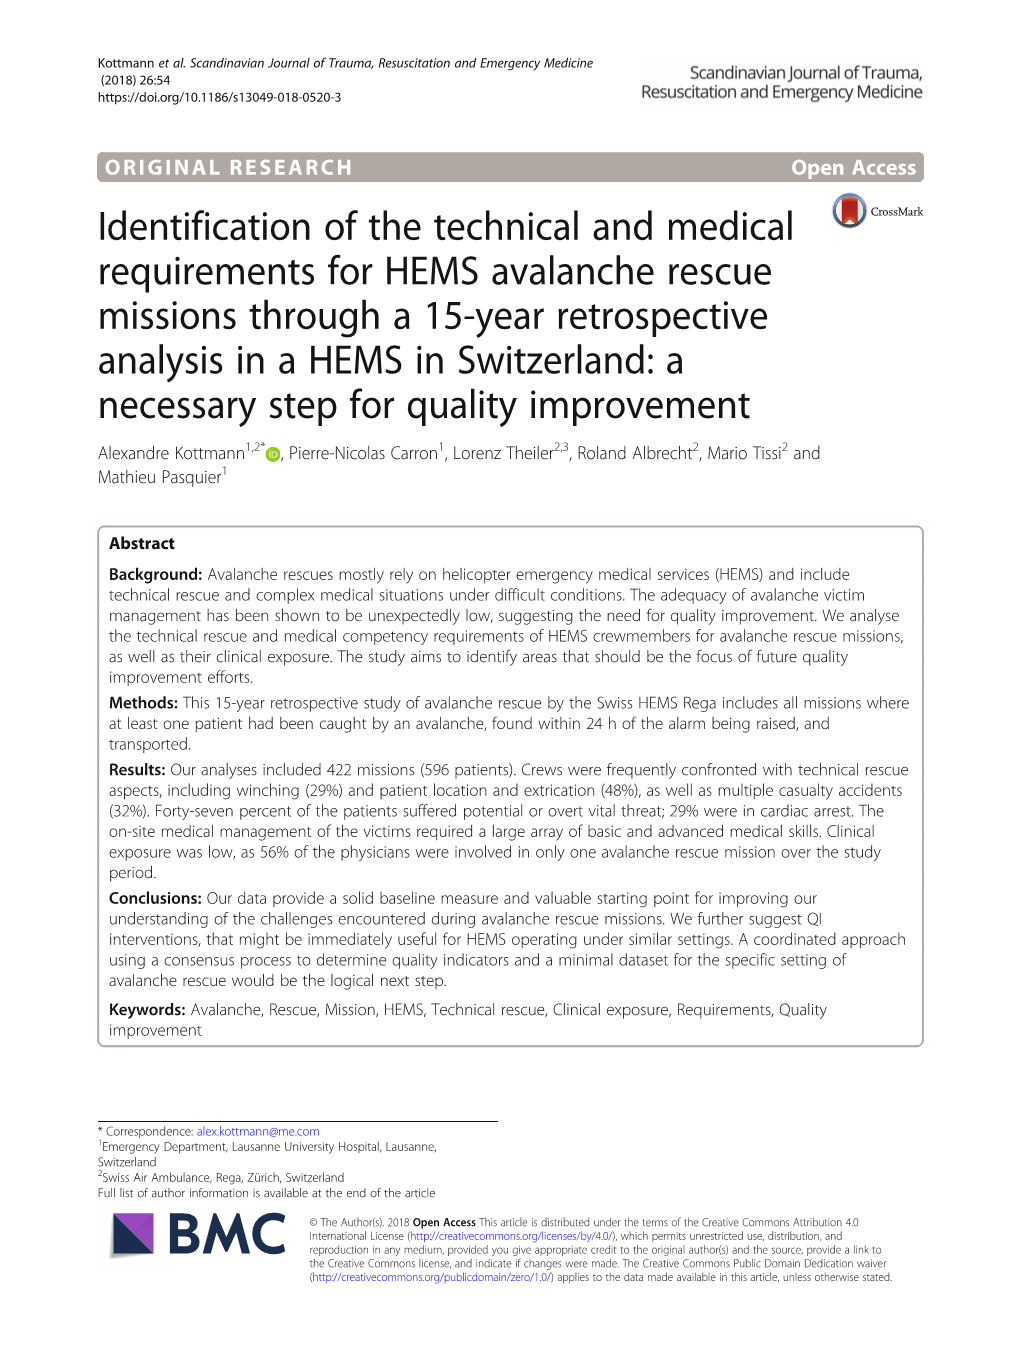 Identification of the Technical and Medical Requirements for HEMS